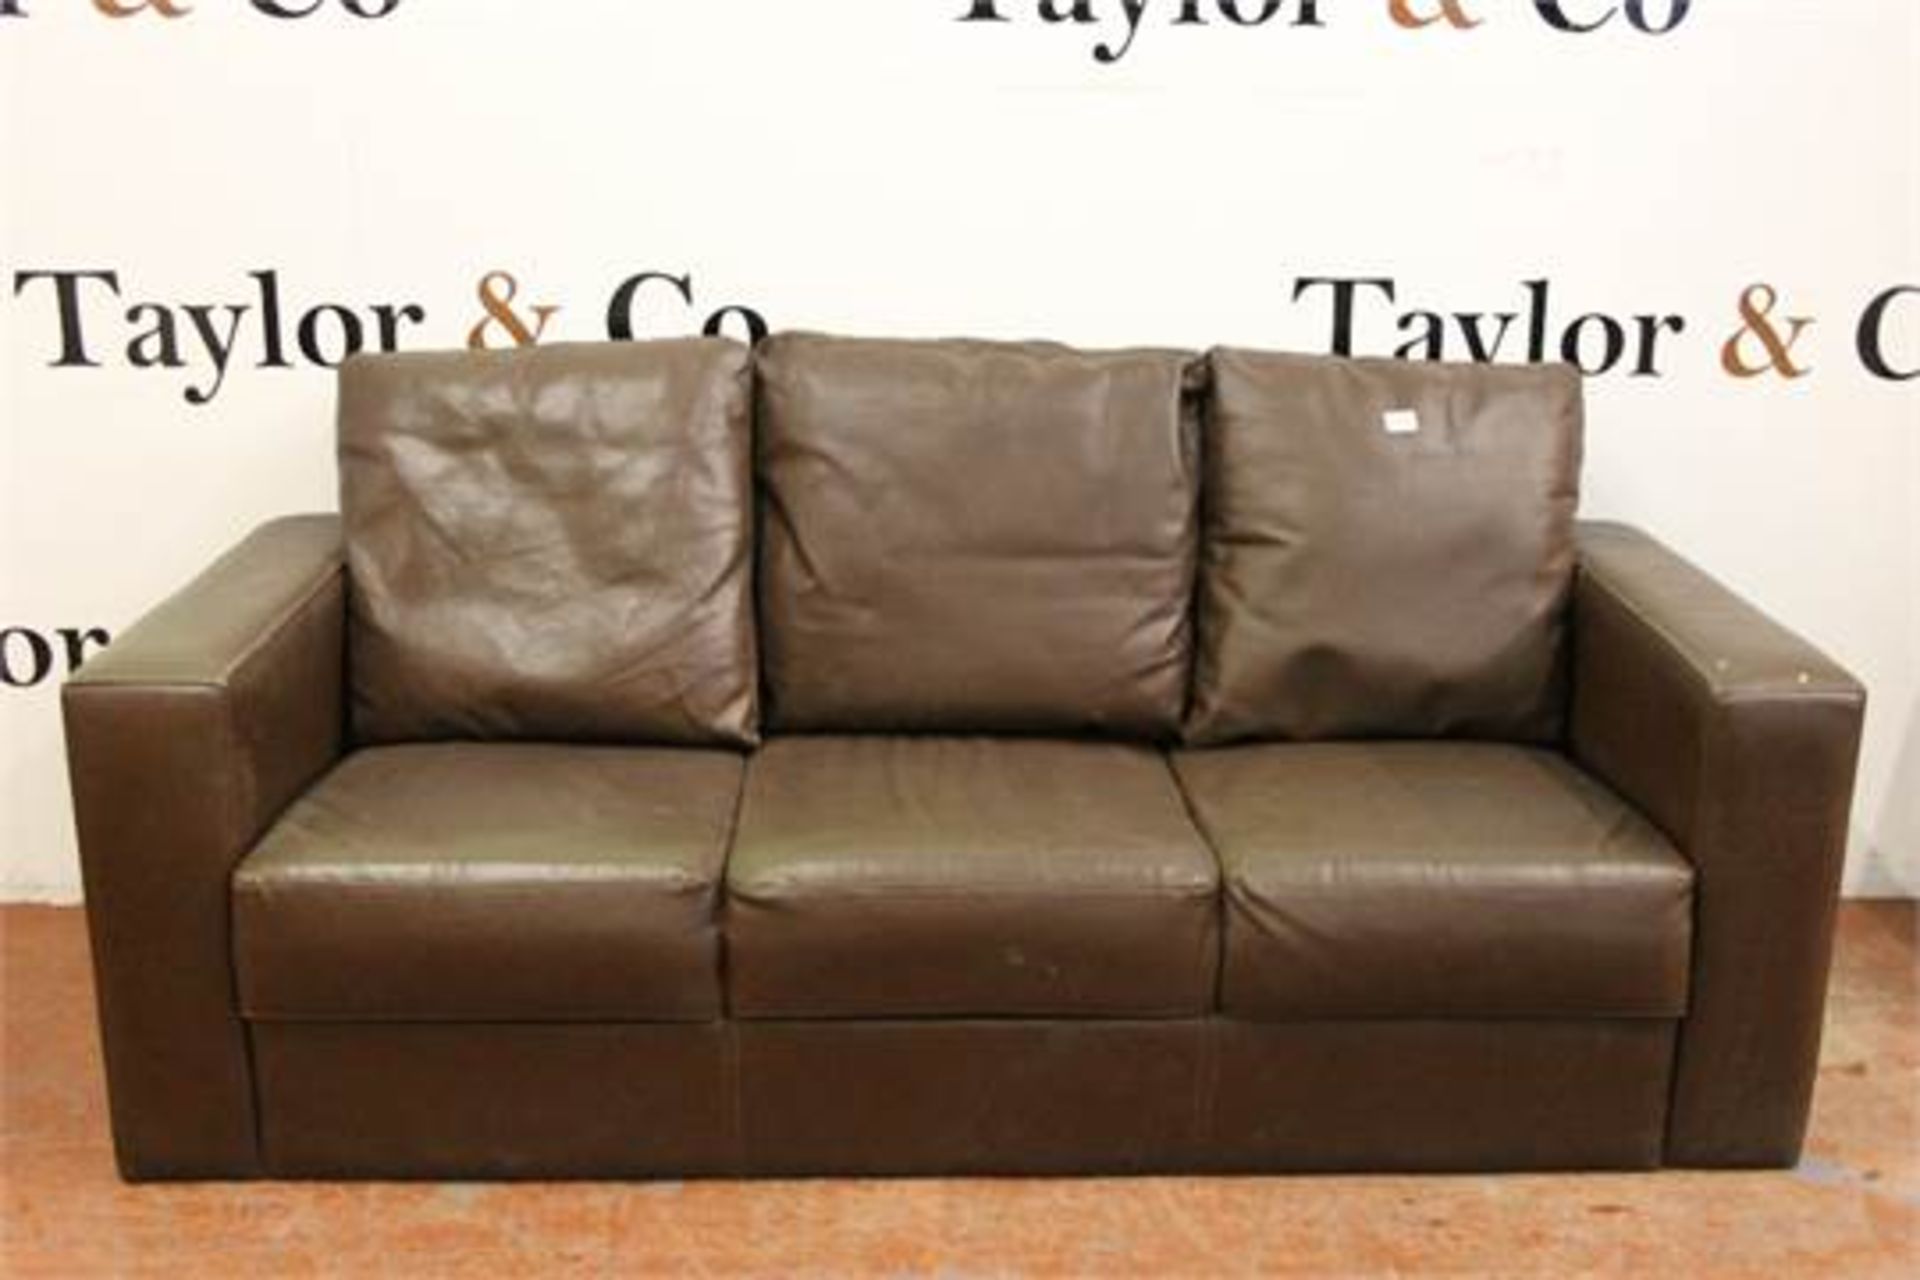 Large 3 Seater Brown Leather Sofa - Image 2 of 2